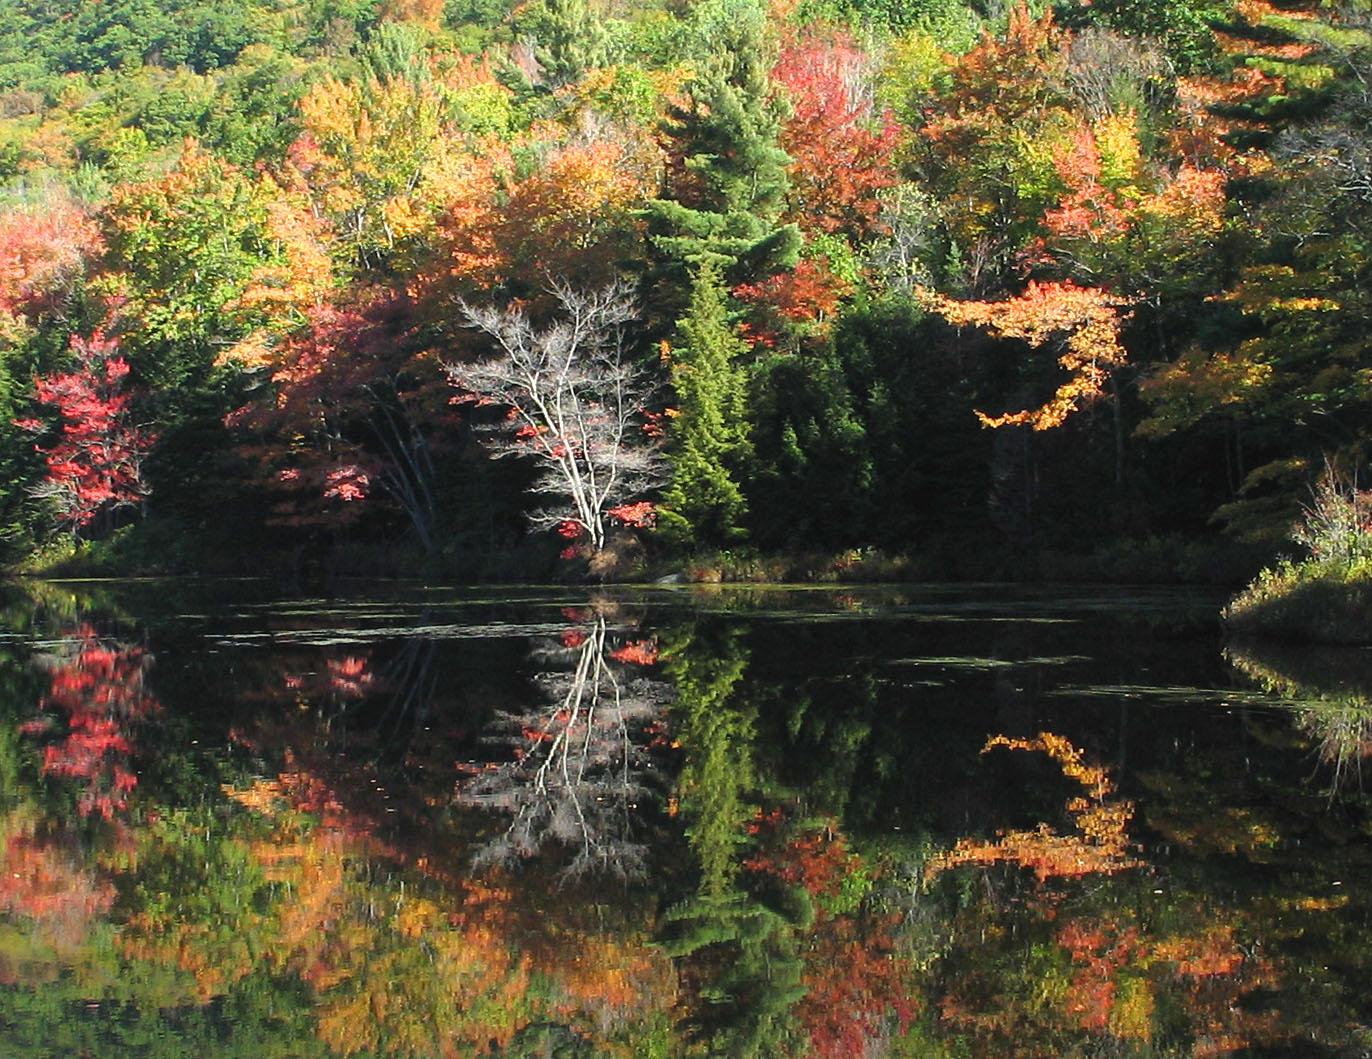 Bog Pond in the Fall (user submitted)